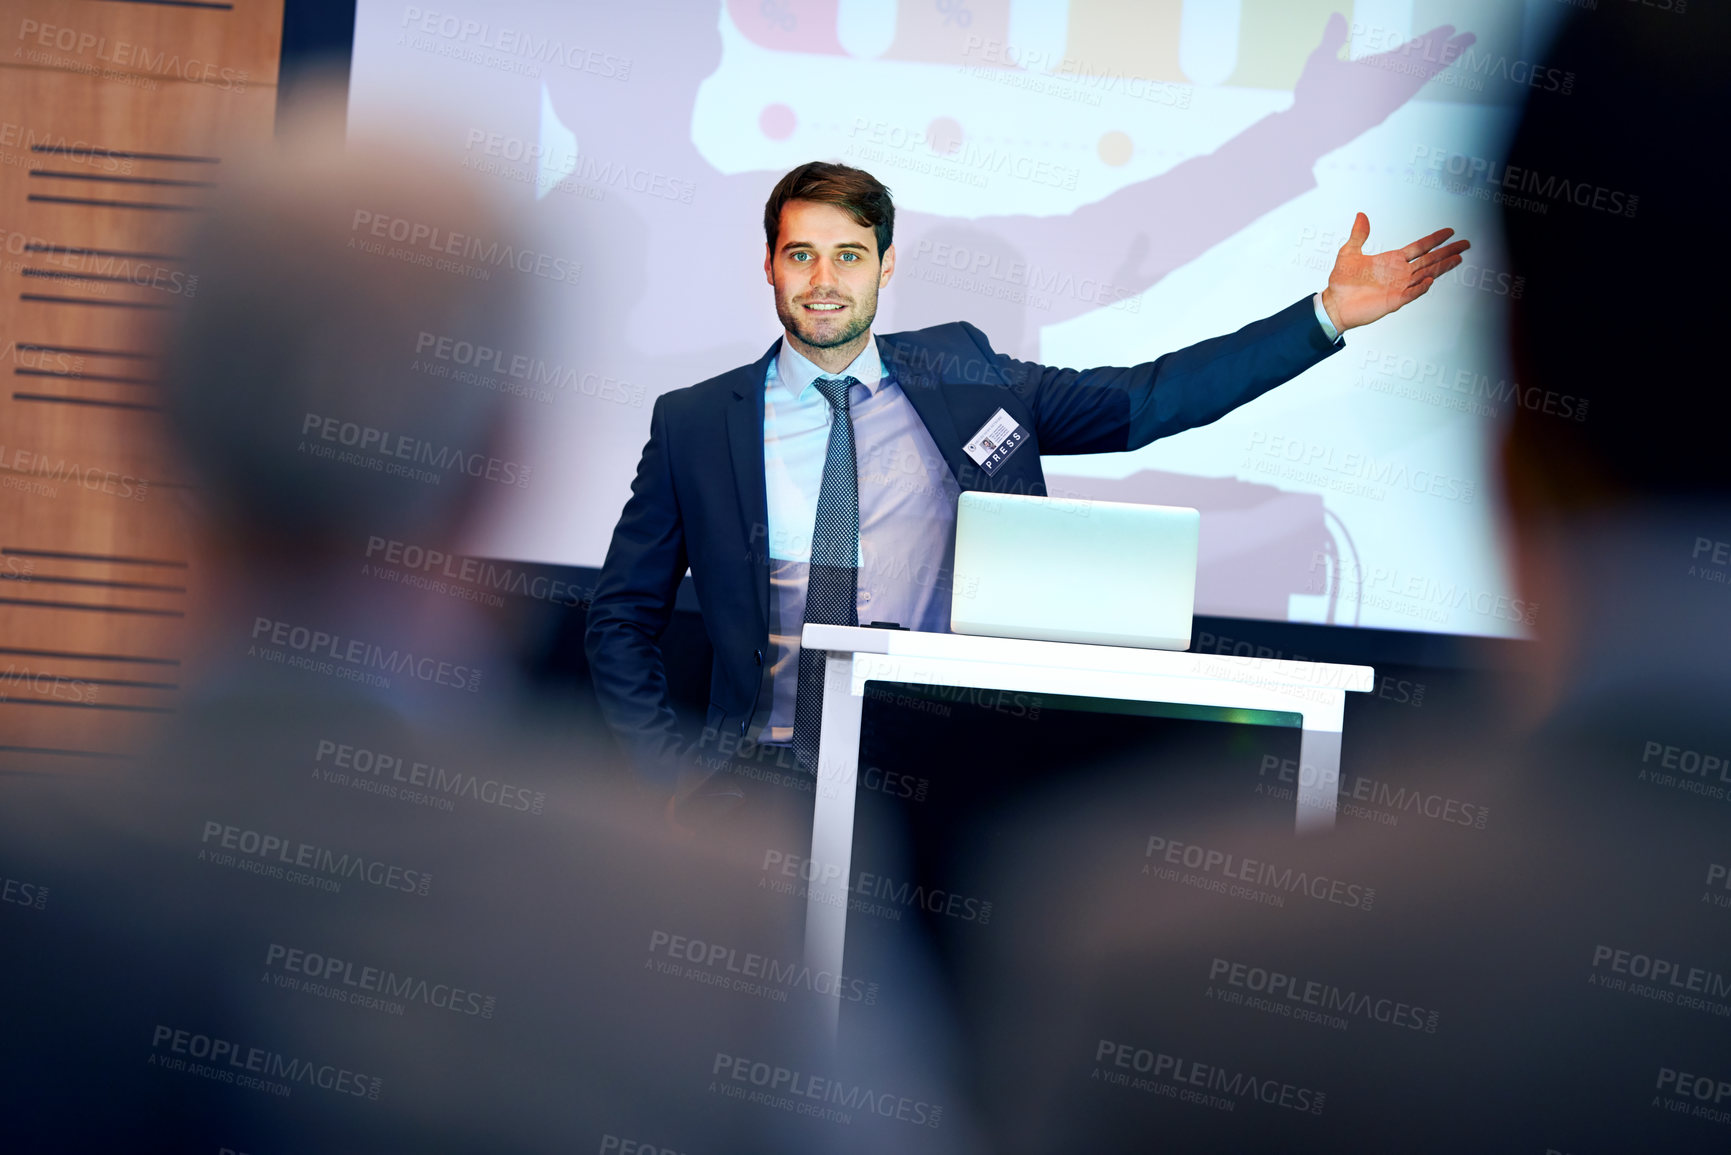 Buy stock photo A confident businessman gesturing while giving a presentation at a press conference